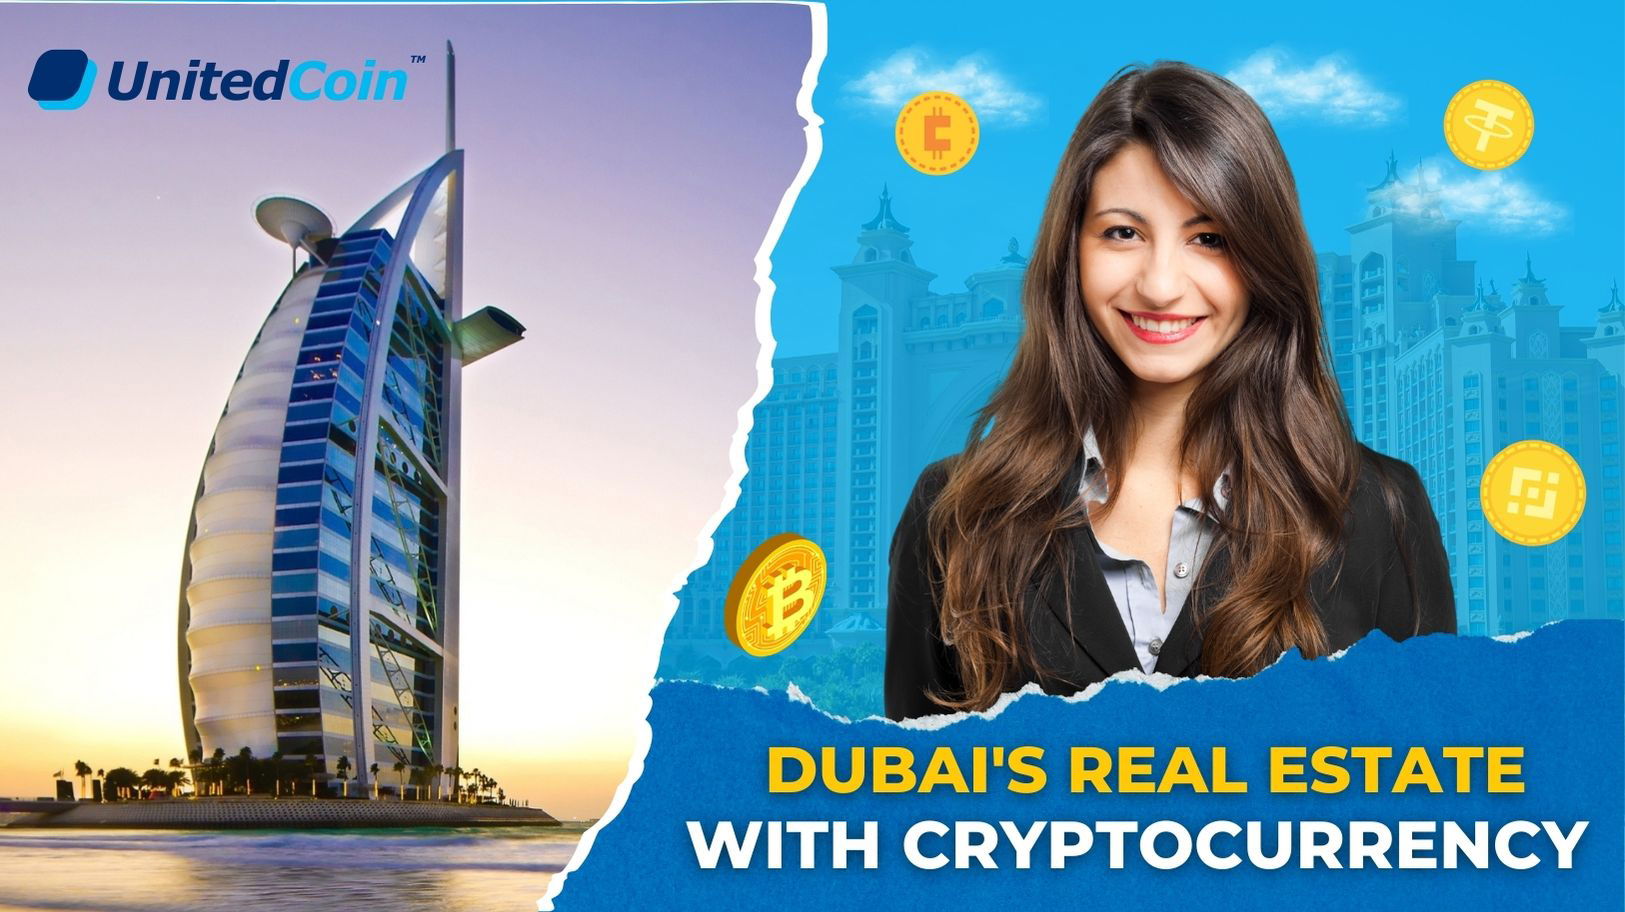 Understanding Dubai's Real Estate with Cryptocurrency: A New Opportunity